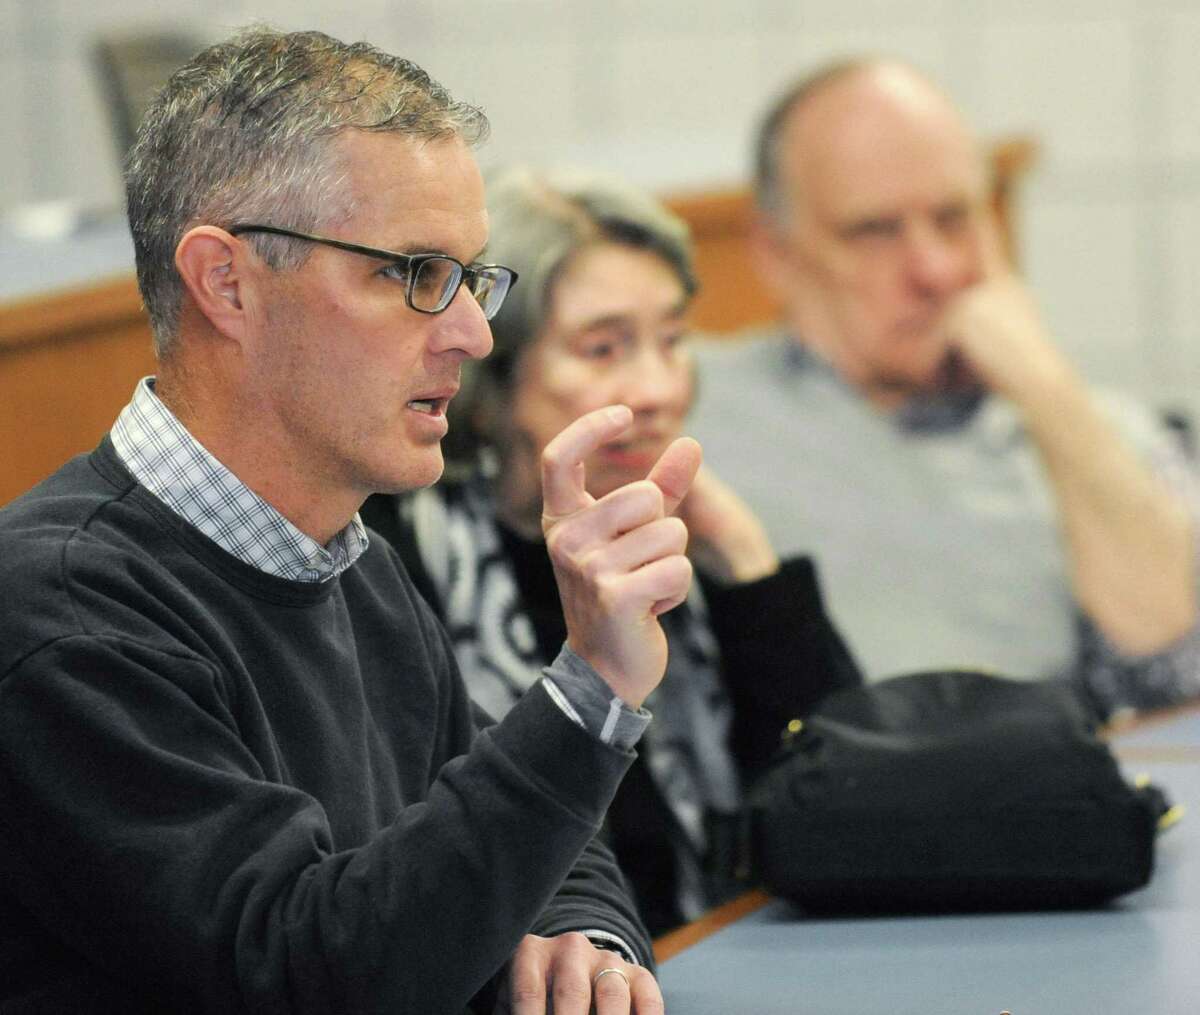 Norwalk resident Kevin Cane attends a forum at Norwalk Community College Thursday, January 31, 2019, to ask Rep. Lucy Dathan, Sen. Bob Duff and Sen. Will Haskell about their perspectives different issues at the college in Norwalk, Conn.